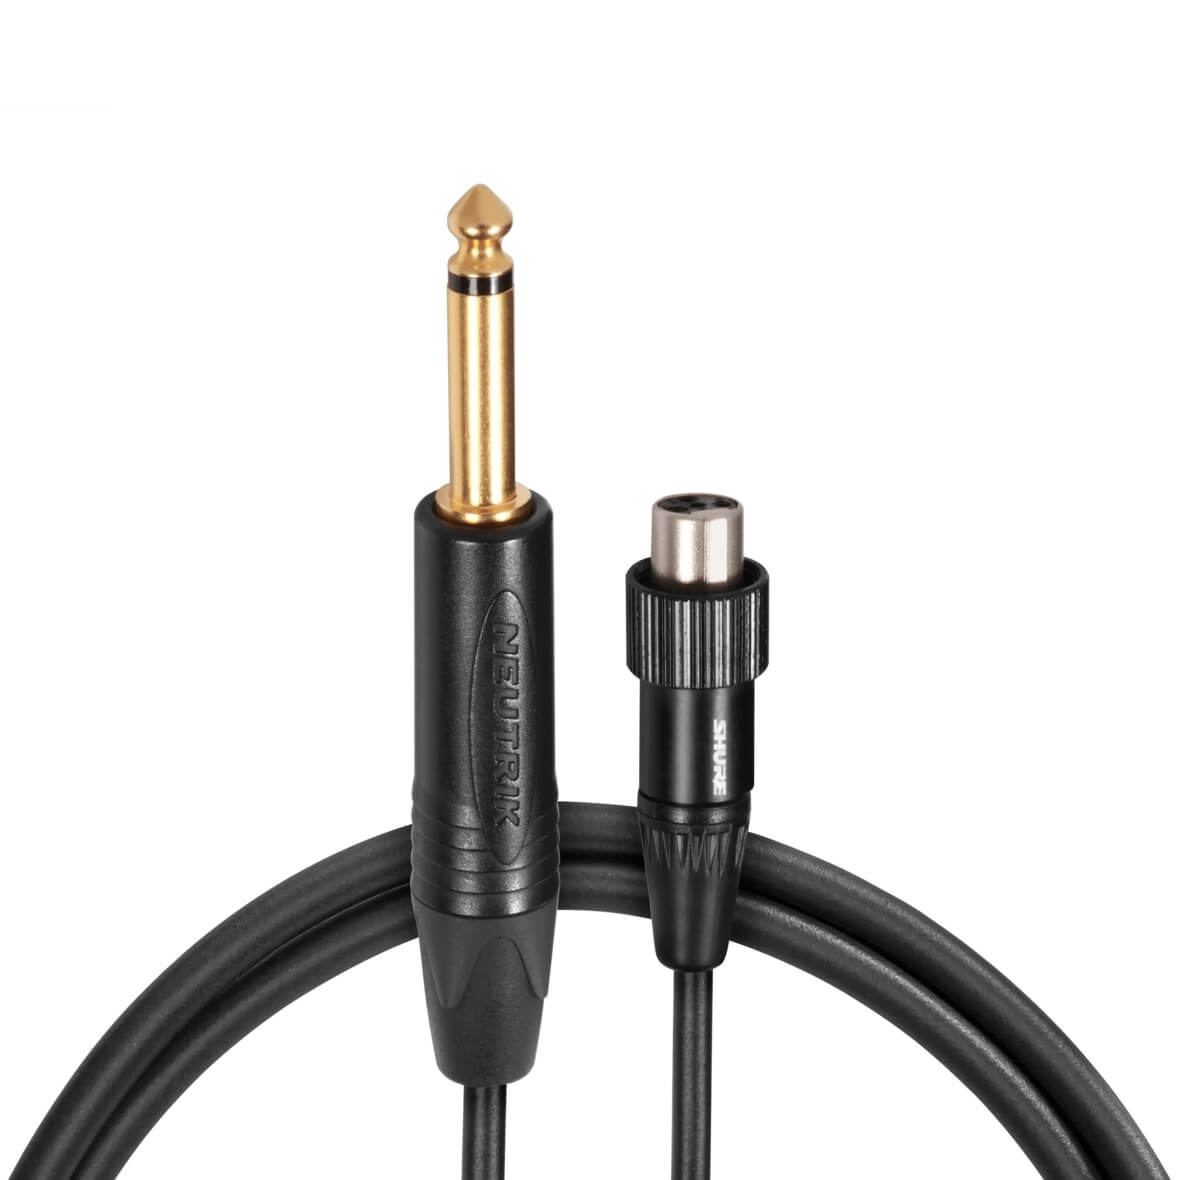 Shure WA305 - Premium Guitar/Bass Cable with locking thread, connector ends